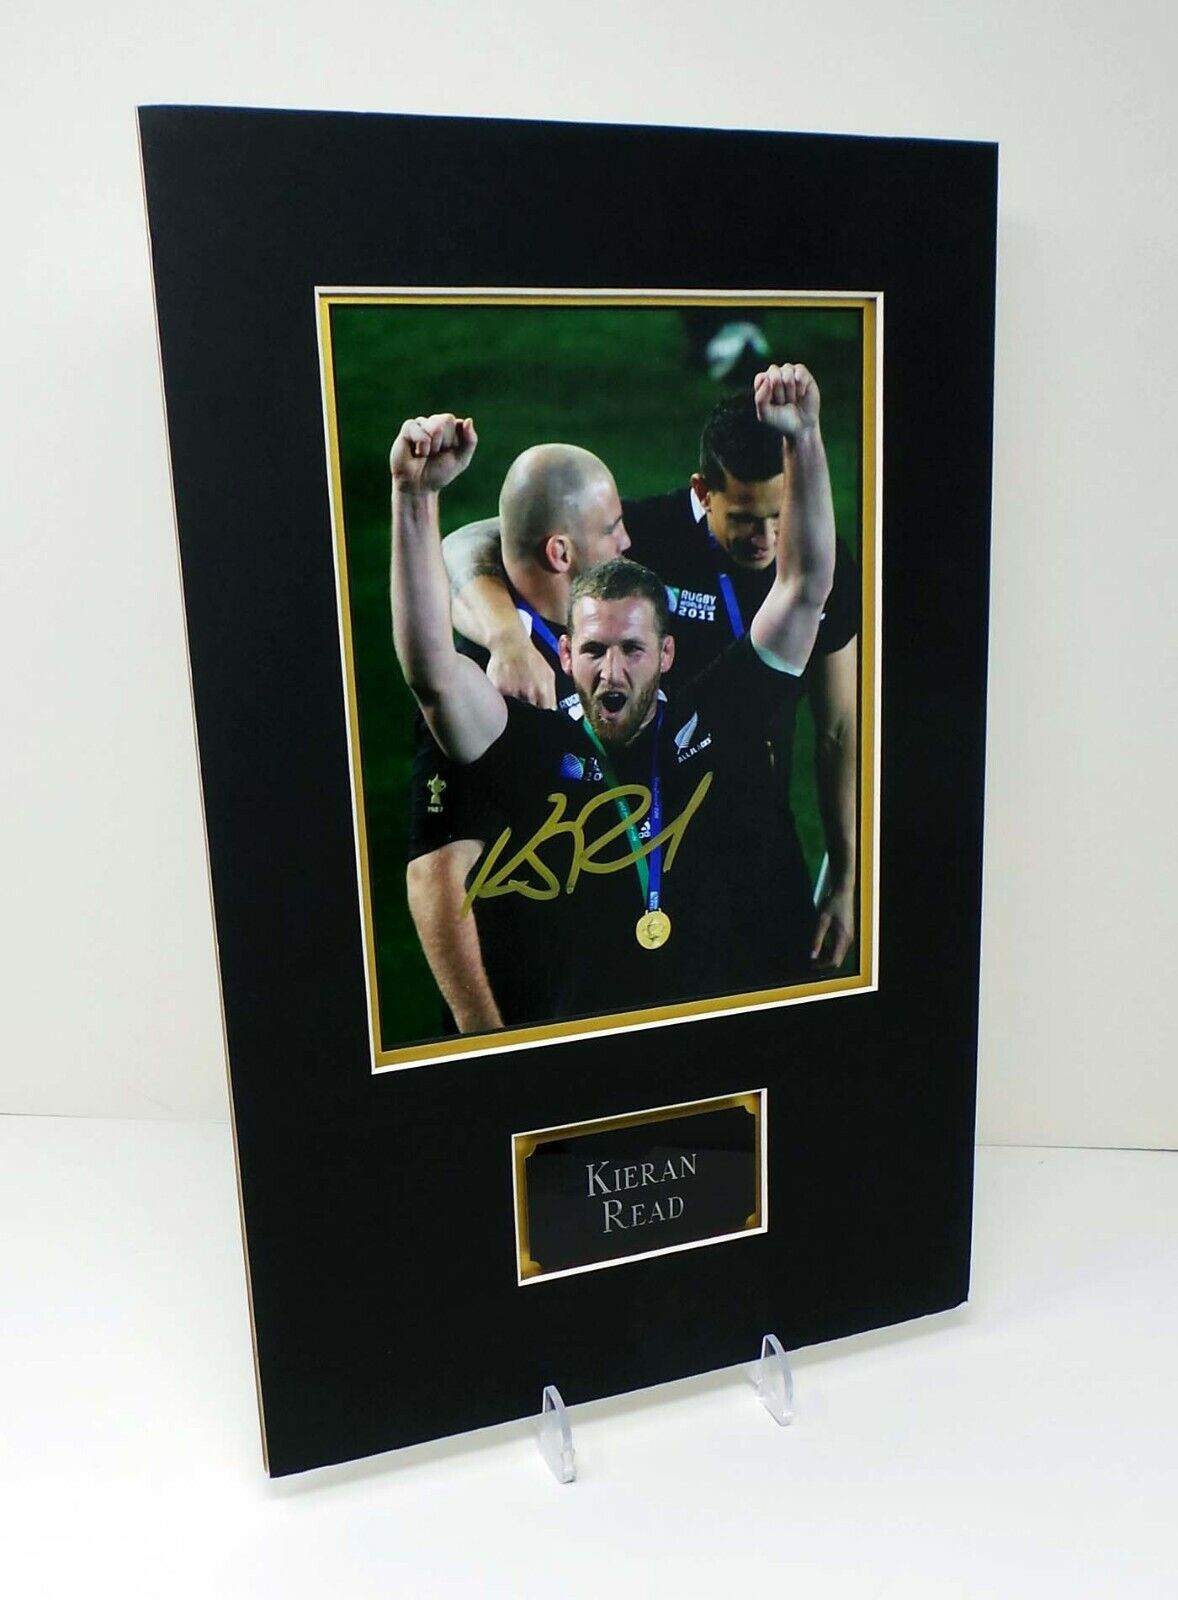 Kieran READ New Zealand Rugby All Blacks Signed Mounted 10x8 Photo Poster painting AFTAL RD COA